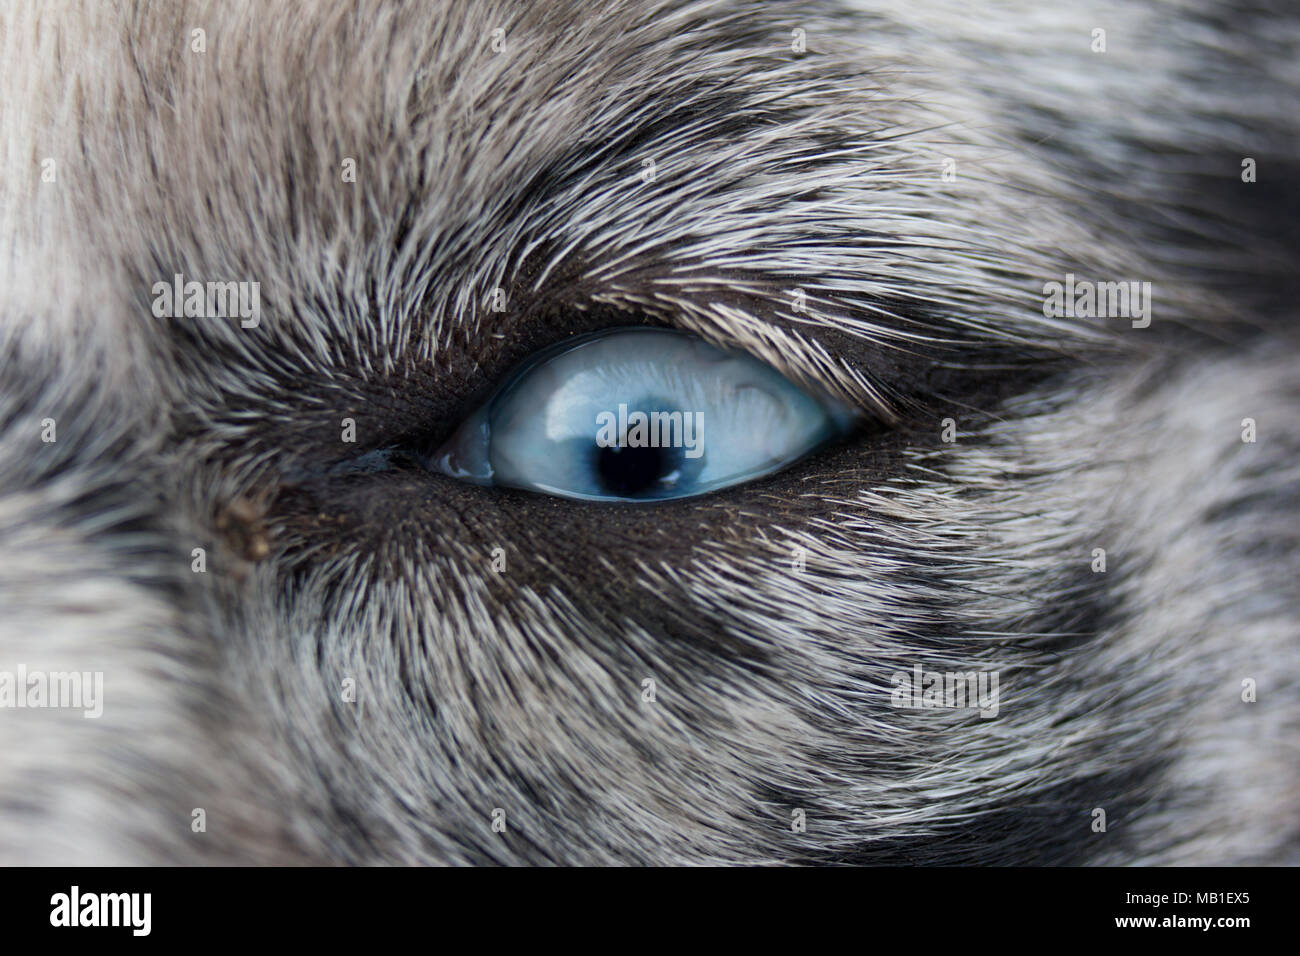 Close up of a dog eye Banque D'Images